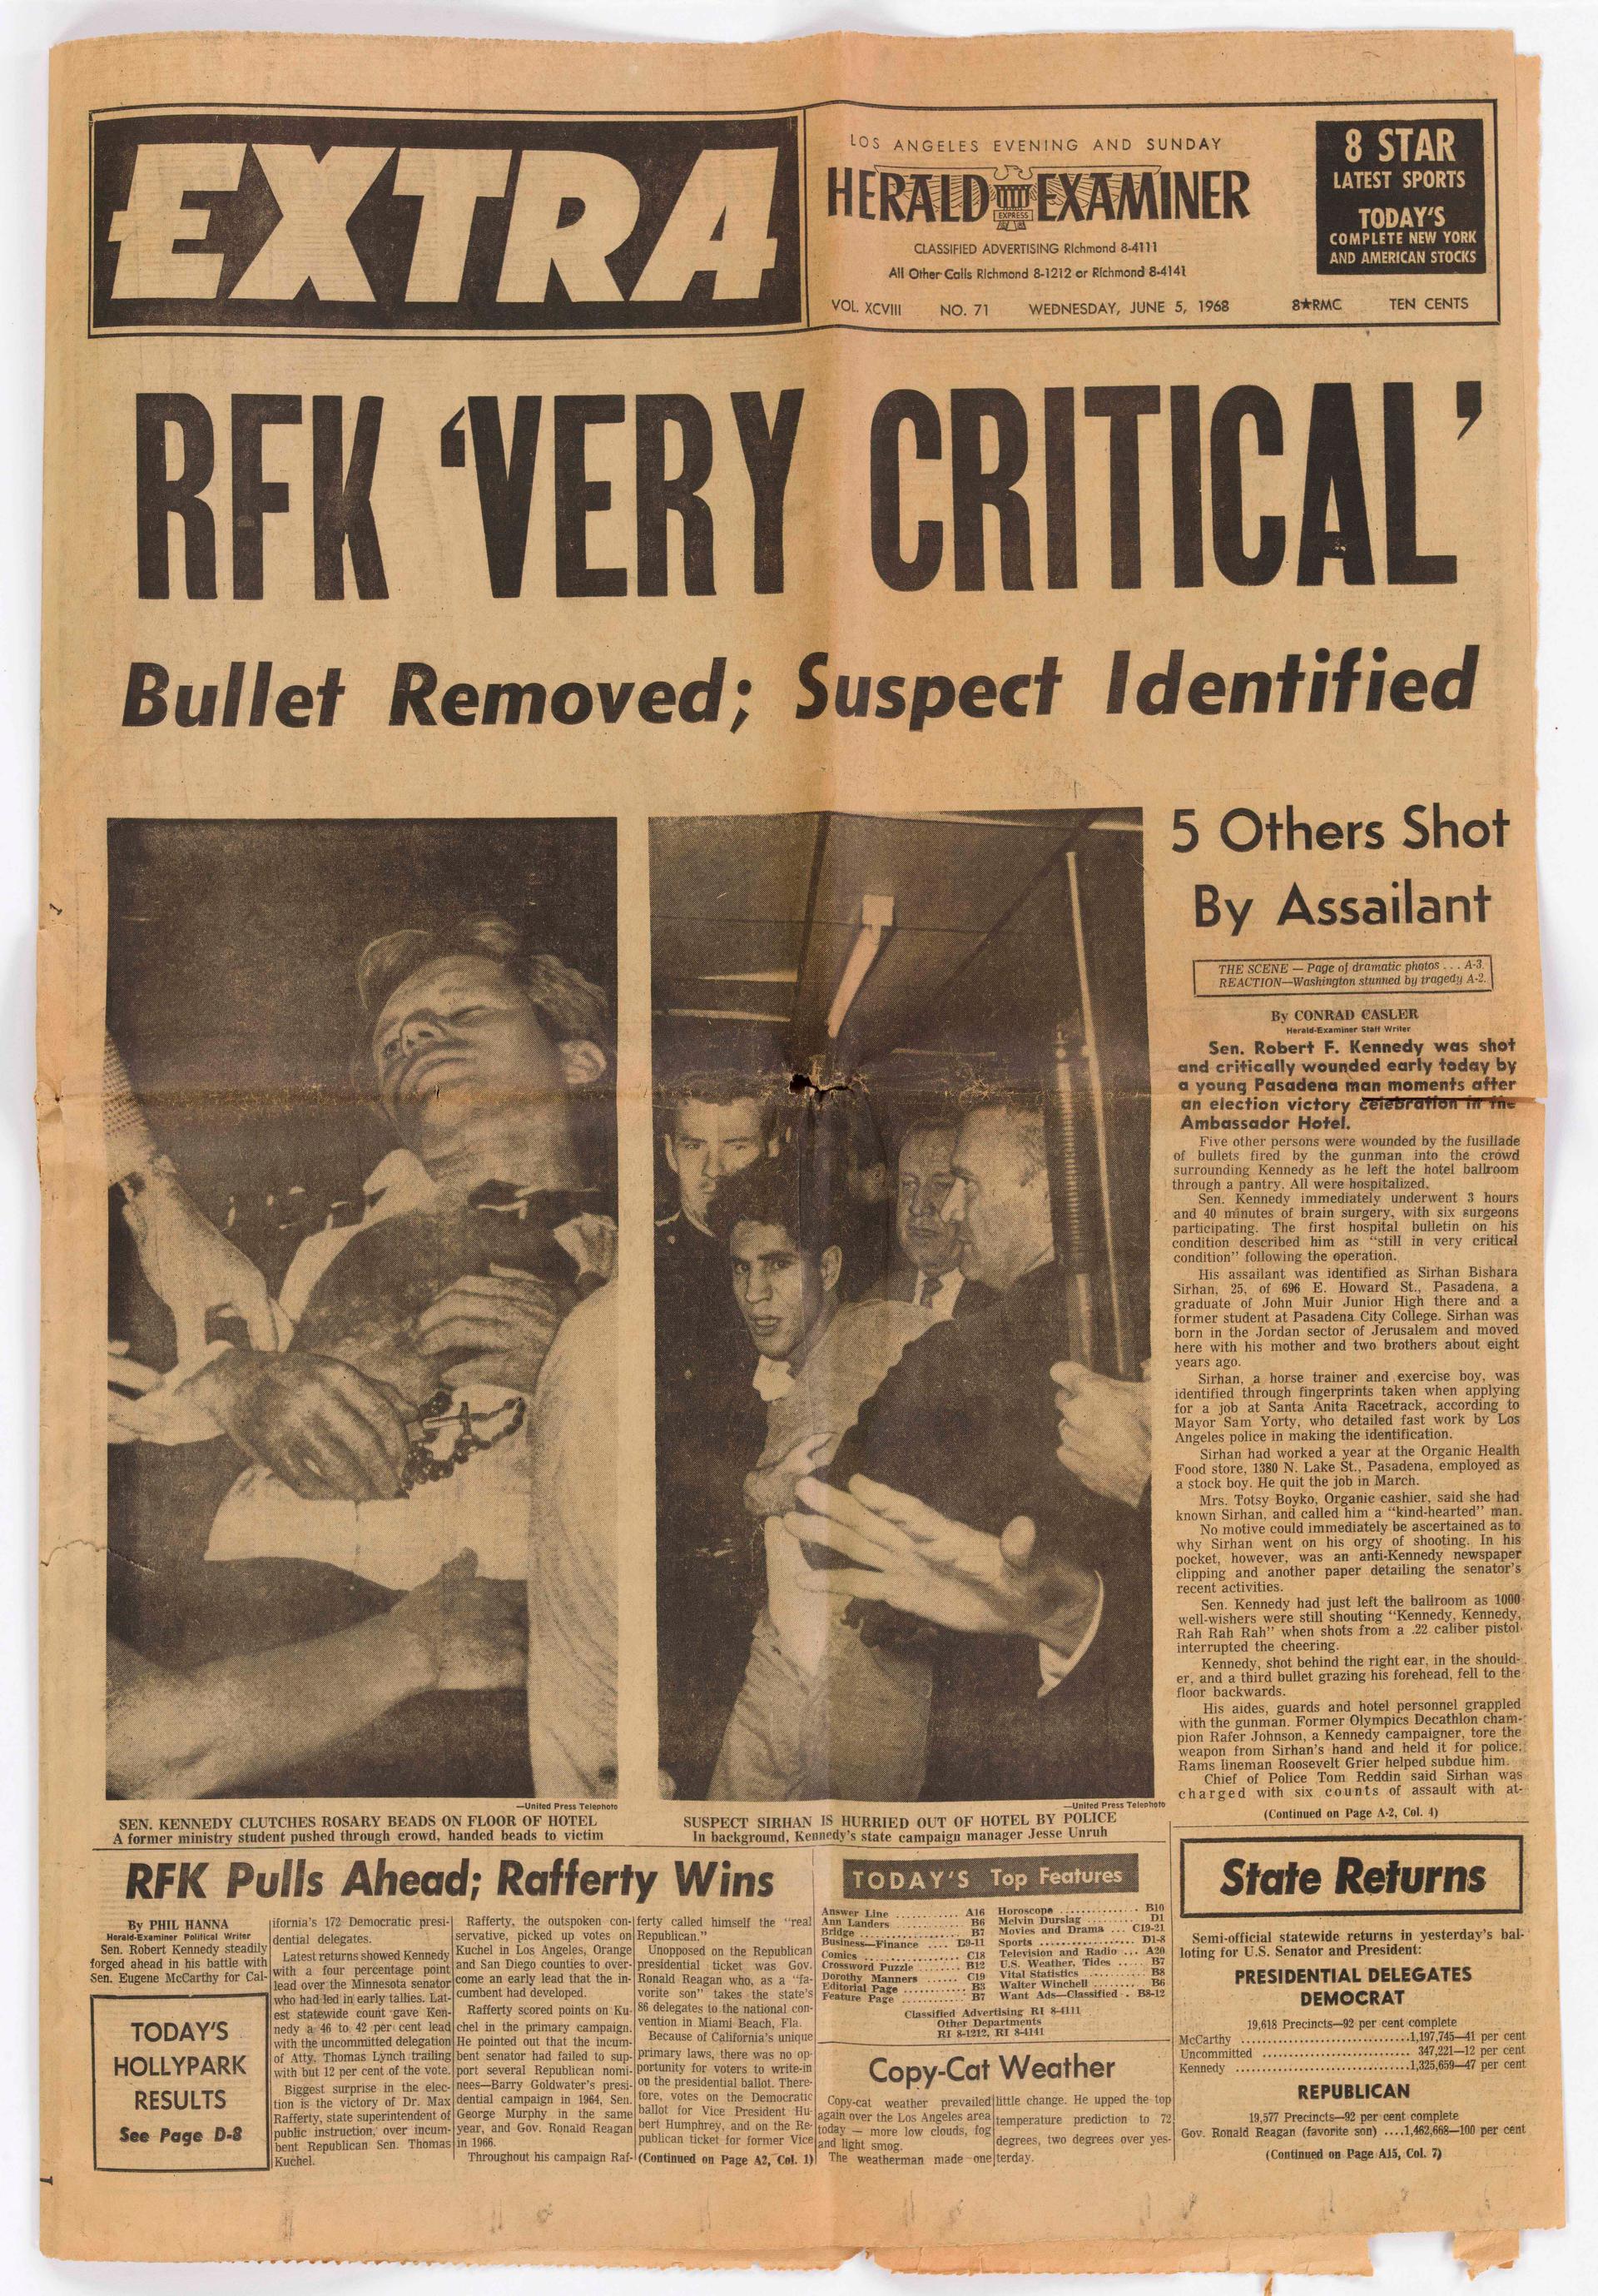 A special edition of the Los Angeles Herald Examiner newspaper following the shooting of Senator Robert F. Kennedy